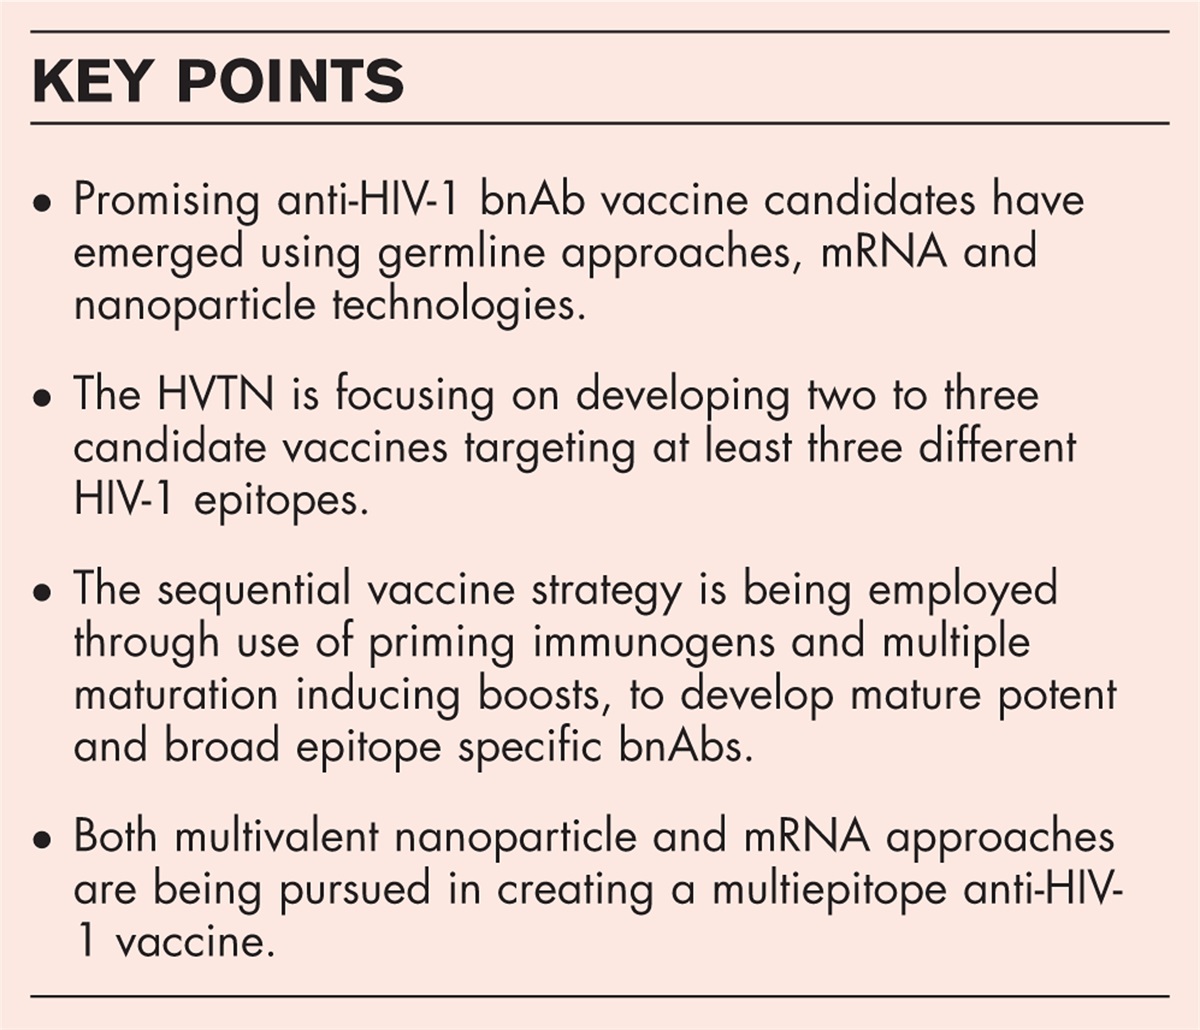 Discovery medicine – the HVTN's iterative approach to developing an HIV-1 broadly neutralizing vaccine